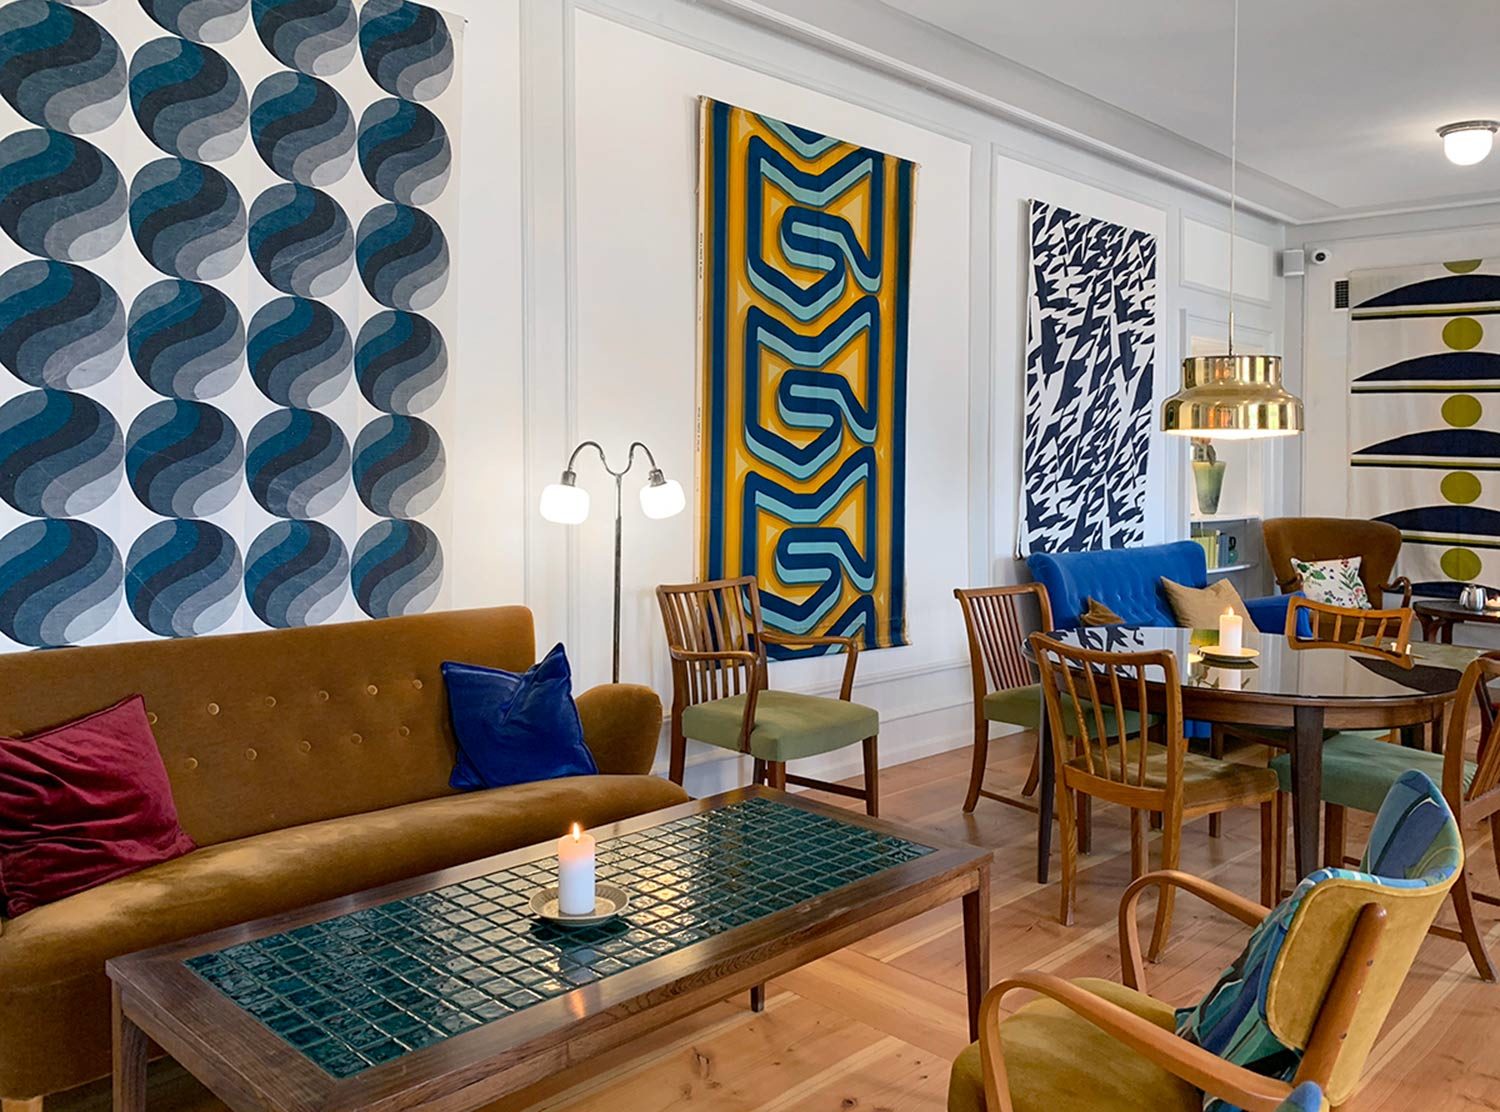 Kanalhuset The entire hotel is decked out in vintage midcentury Scandinavian furniture and textiles